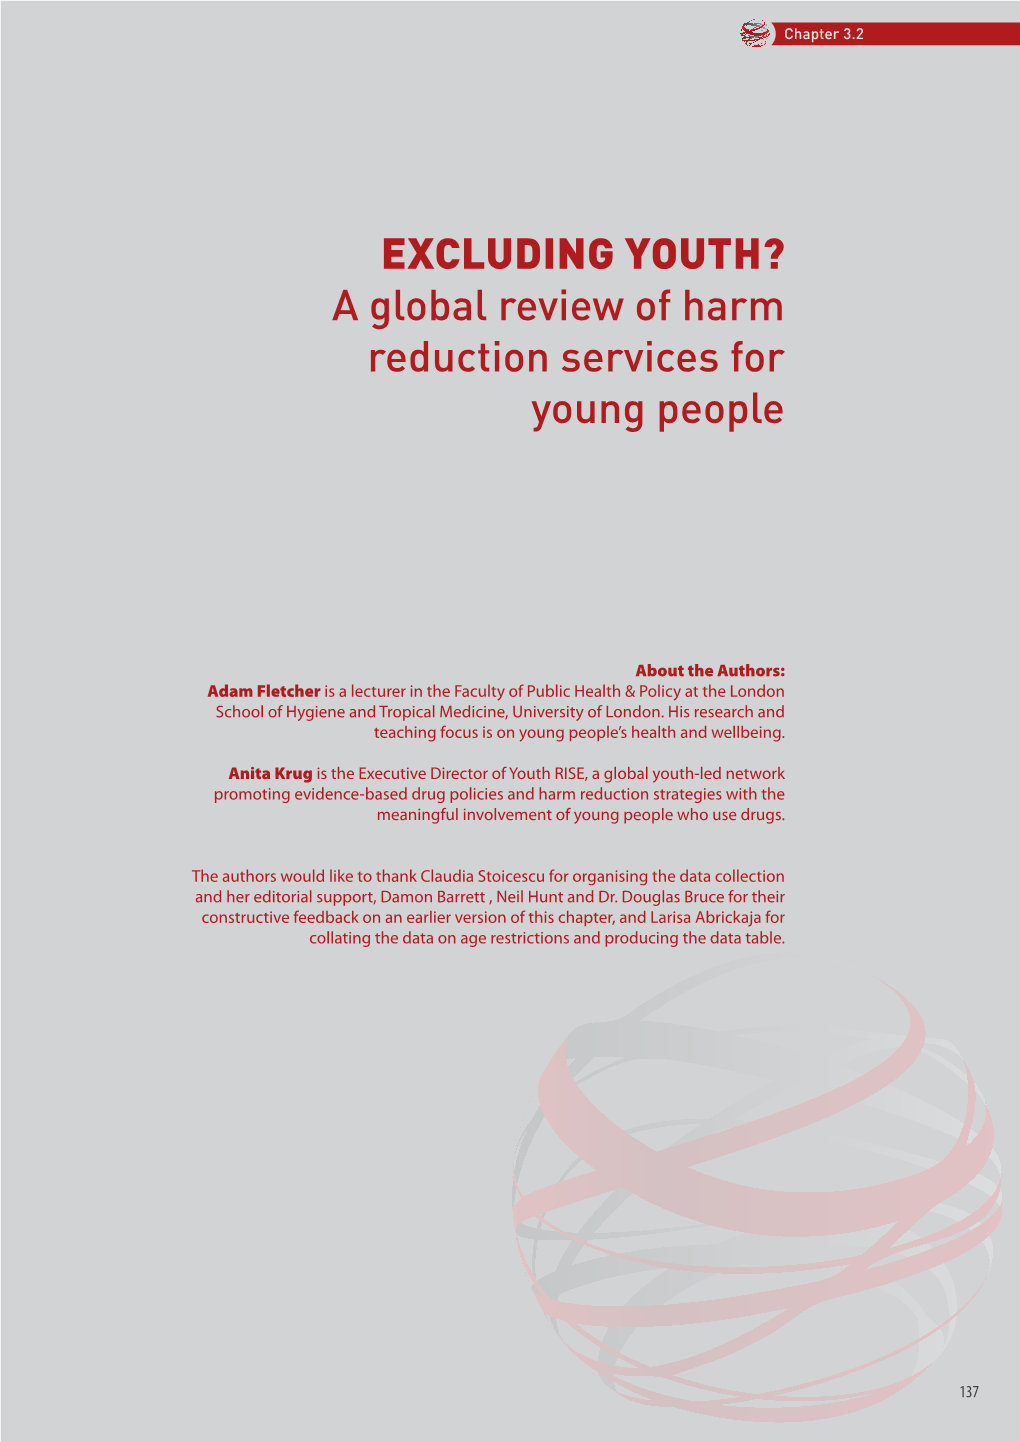 Excluding Youth? a Global Review of Harm Reduction Services for Young People